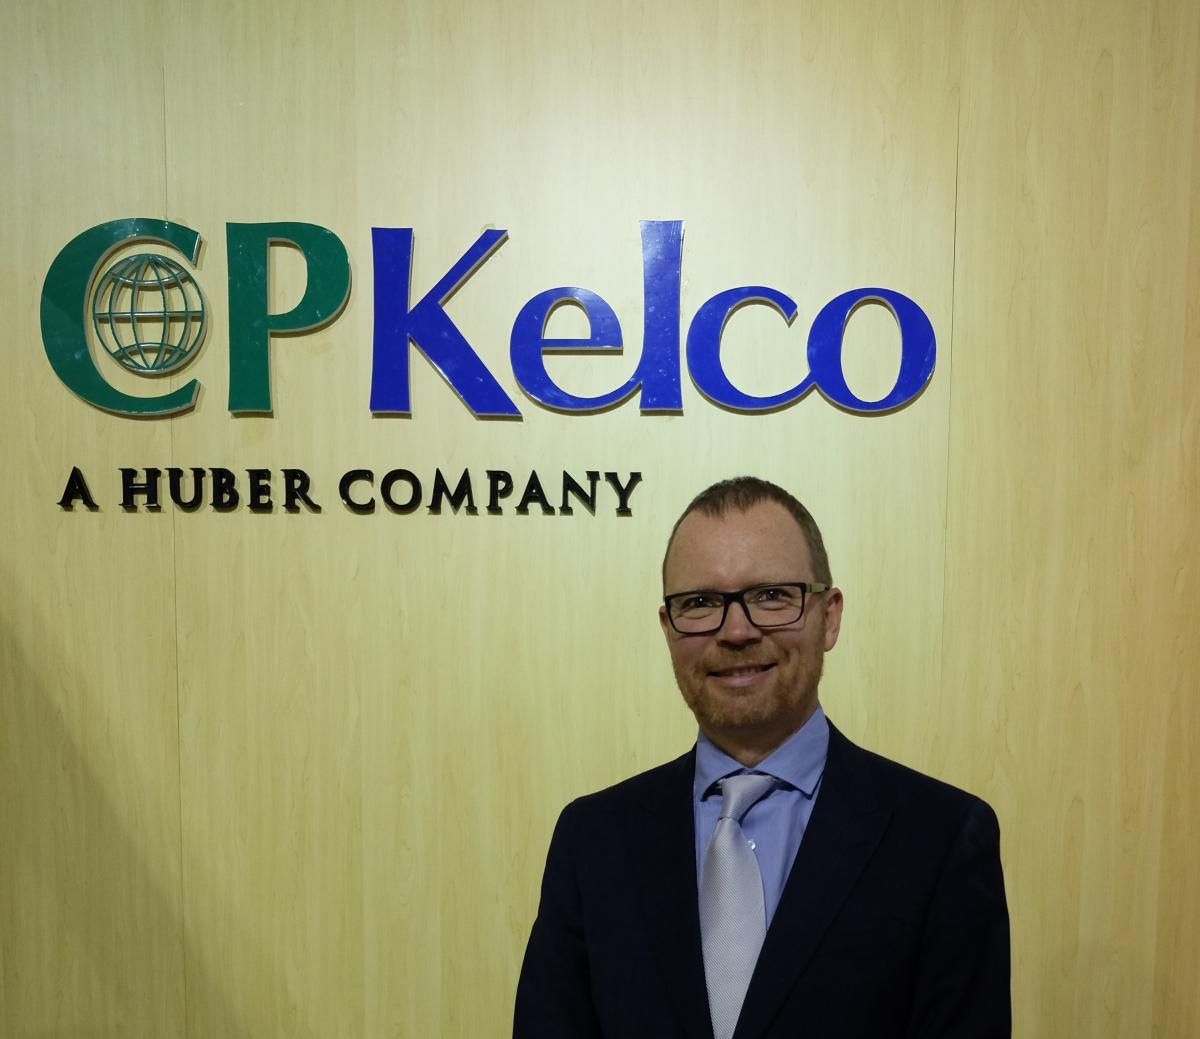 Klaus Bjerrum, CP Kelco’s Senior Vice President of Growth and Innovation